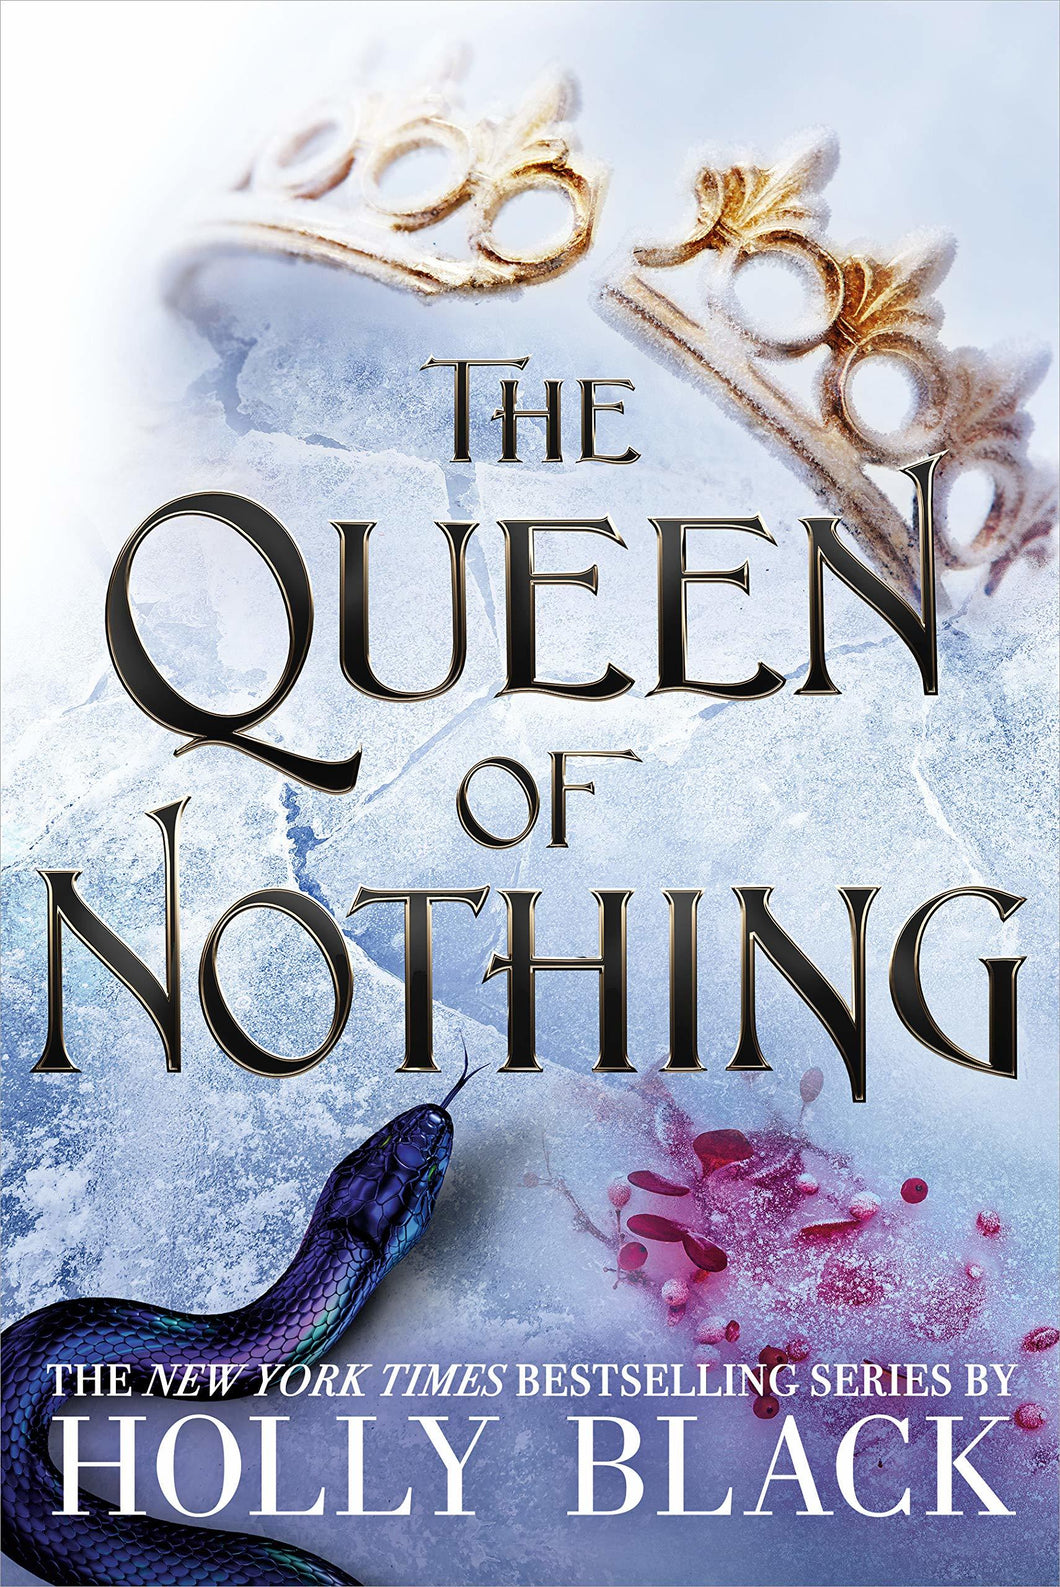 The Queen of Nothing (The Folk of the Air #3) - Holly Black